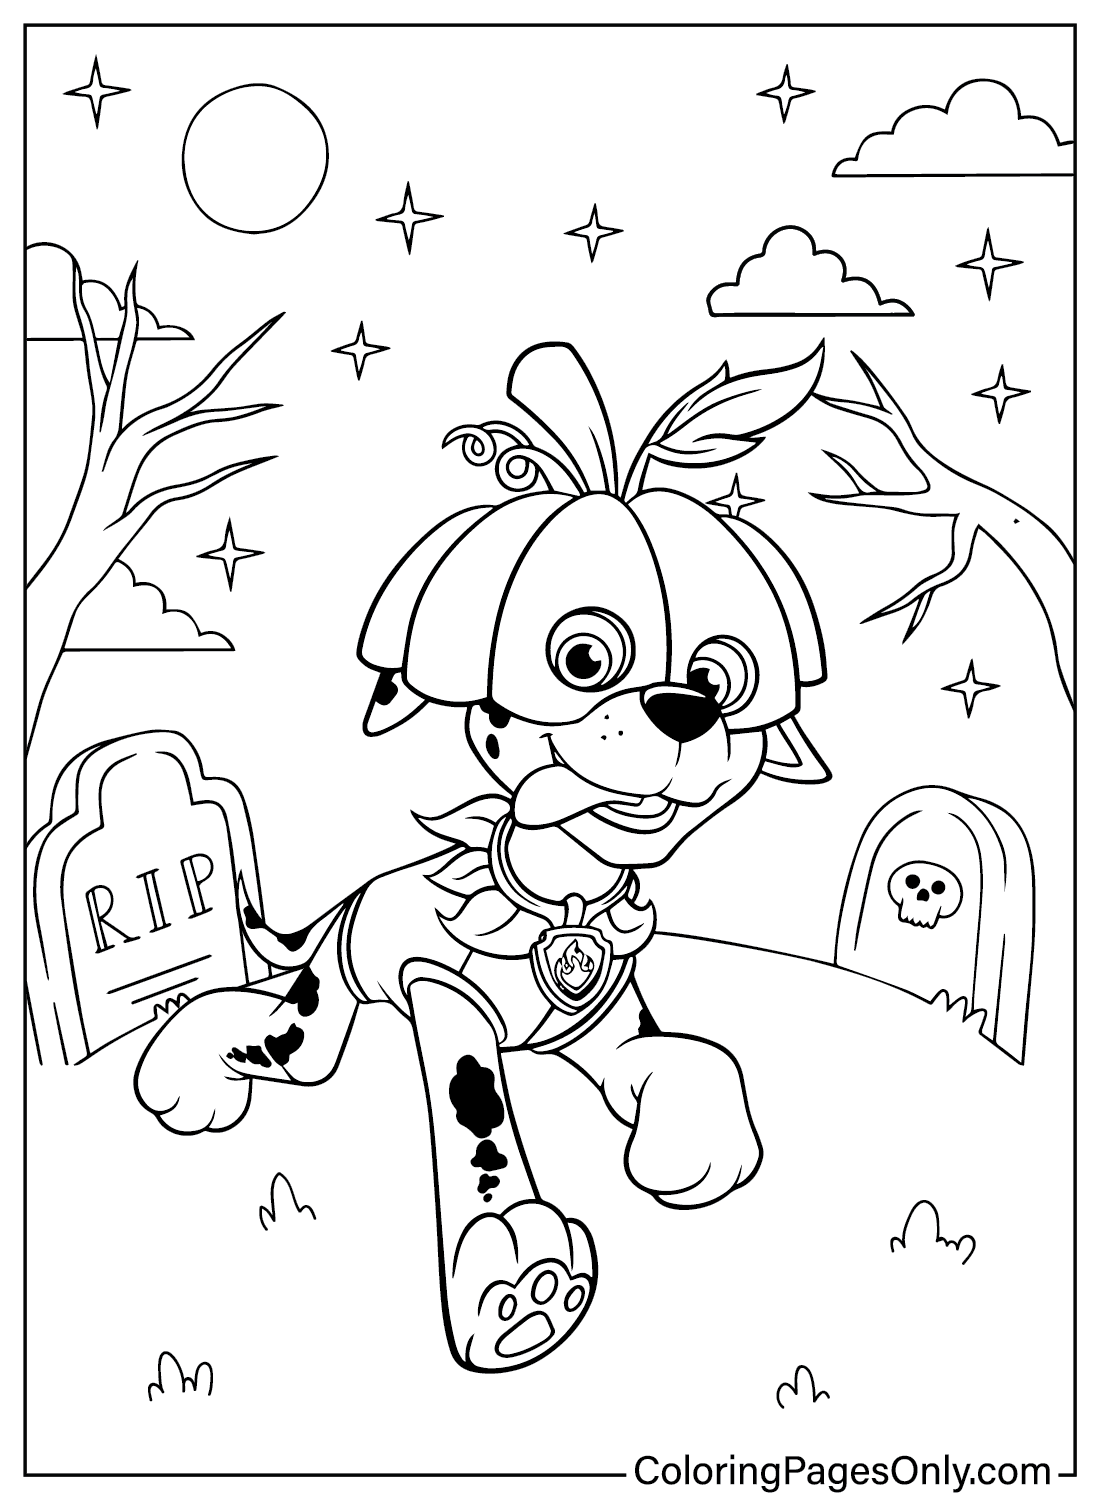 Paw Patrol Halloween Coloring Sheet for Kids from Paw Patrol Halloween